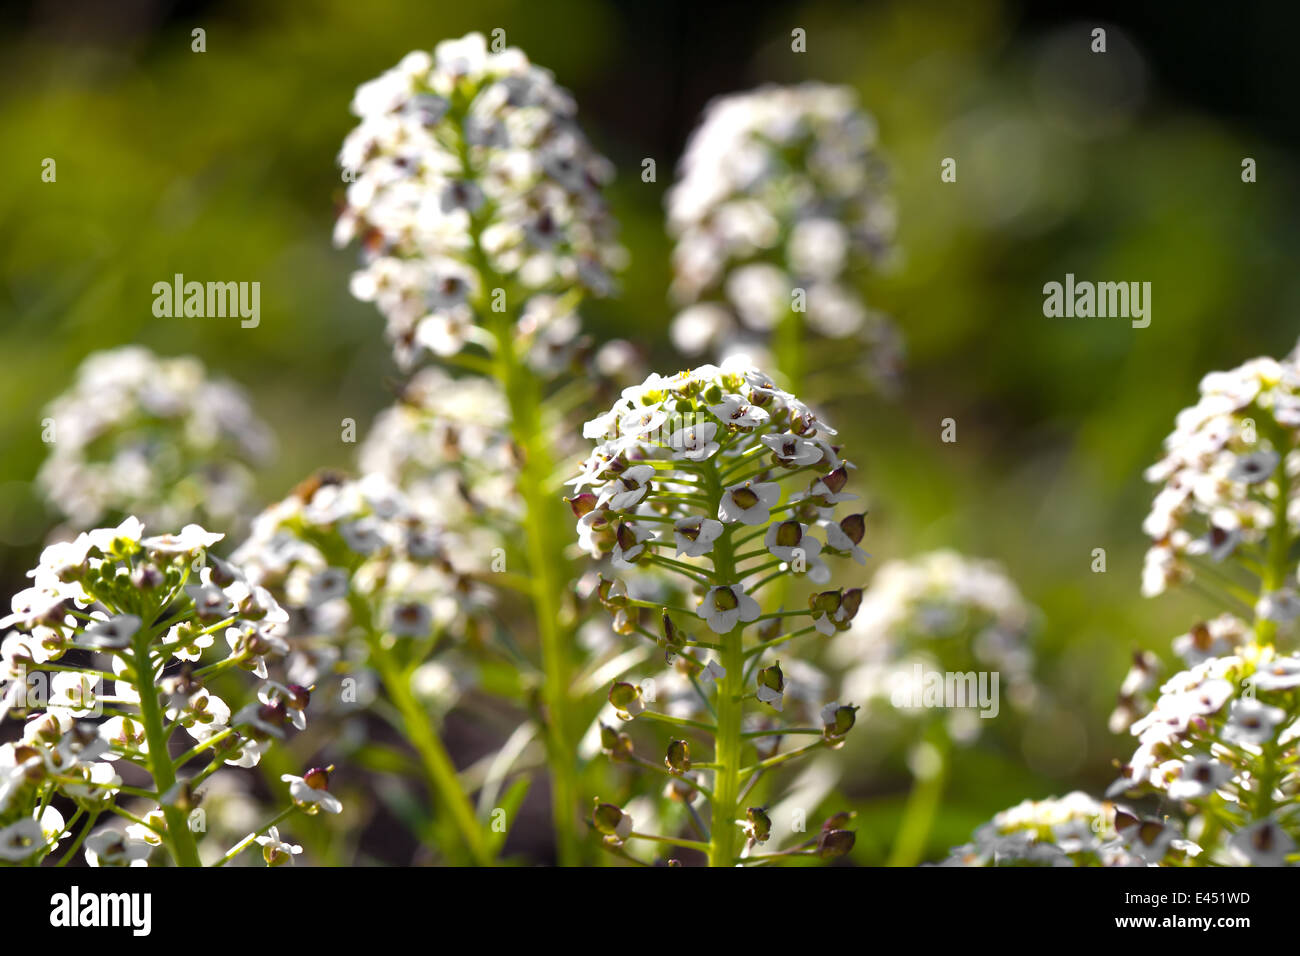 Sweet Alyssum (Lobularia maritima), is a species of low-growing flowering plant in the family Brassicaceae. Stock Photo